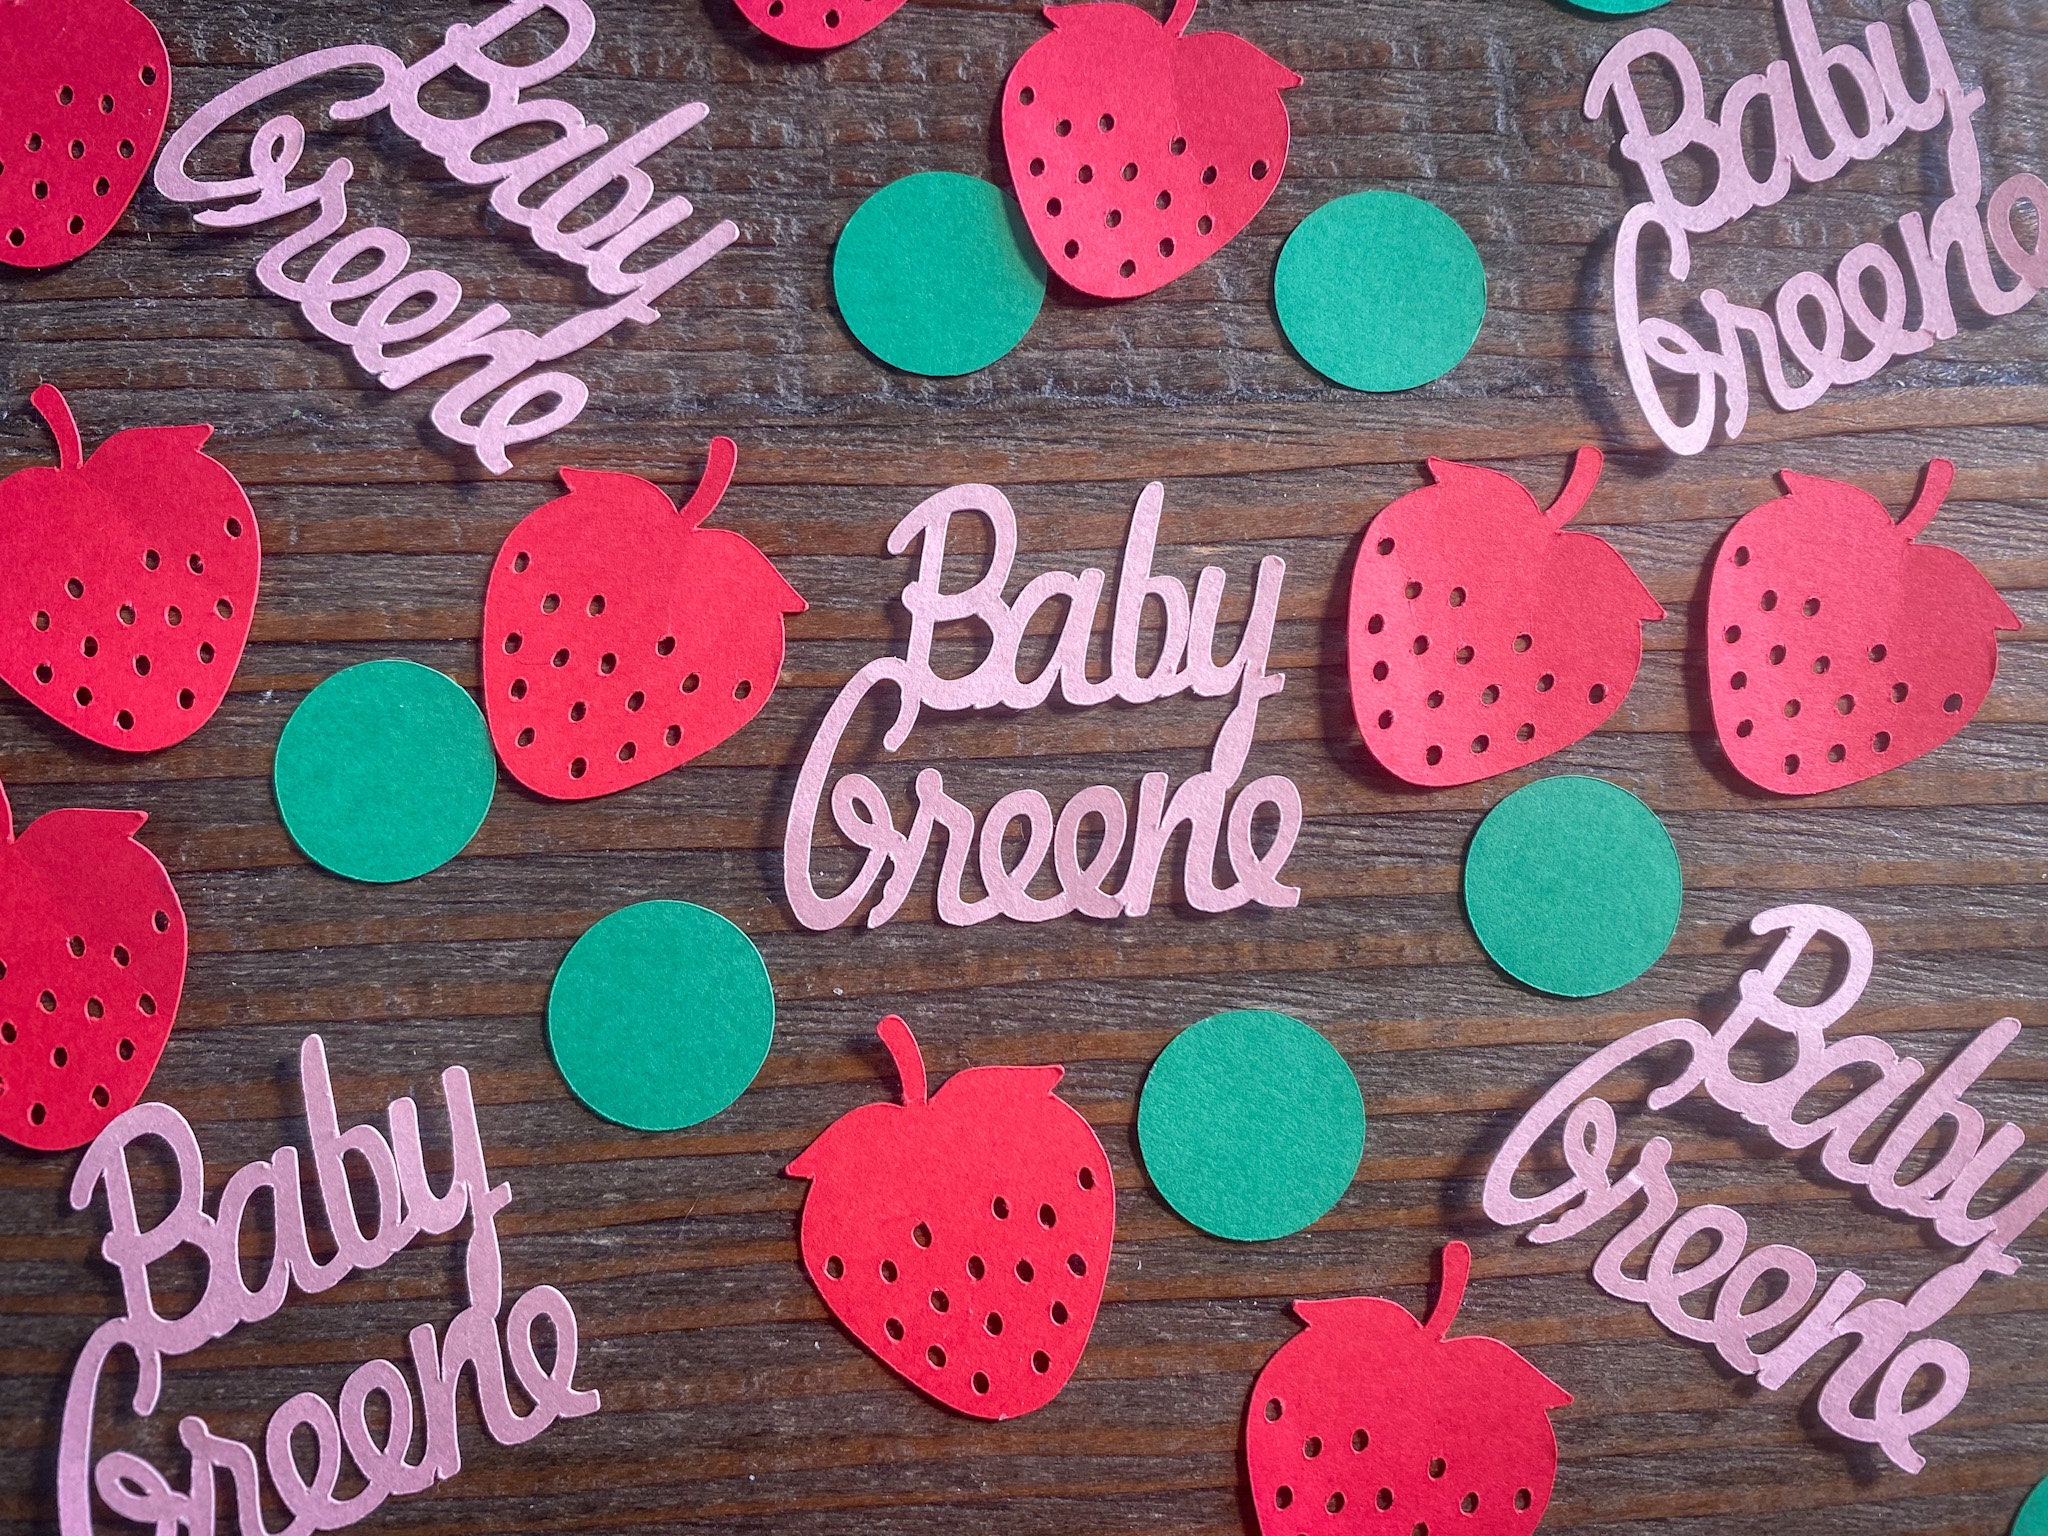 Strawberry Name Confetti/ Sweet One Party Decor/ Berry Sweet/ 